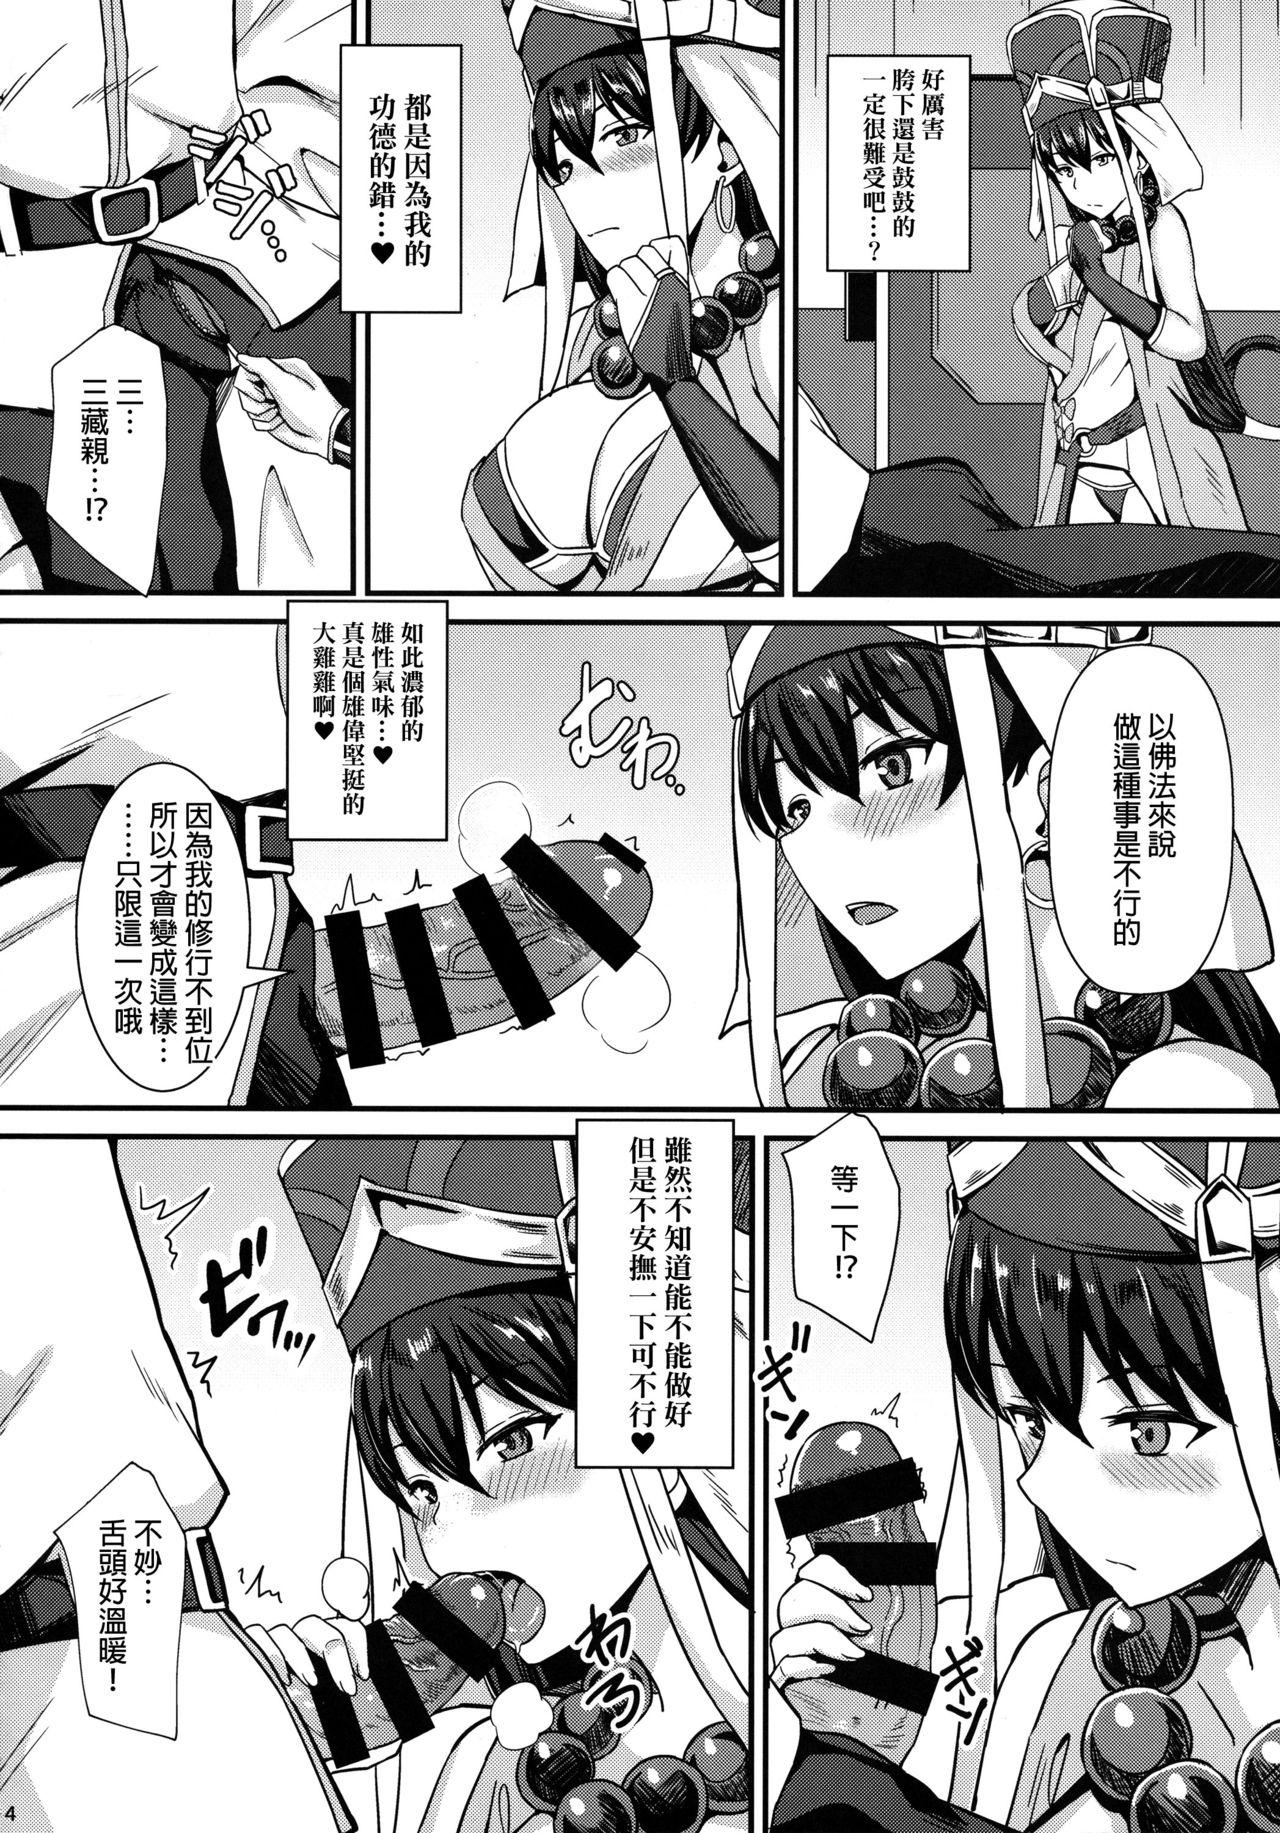 Teacher Burning Halo - Fate grand order Hot Whores - Page 5